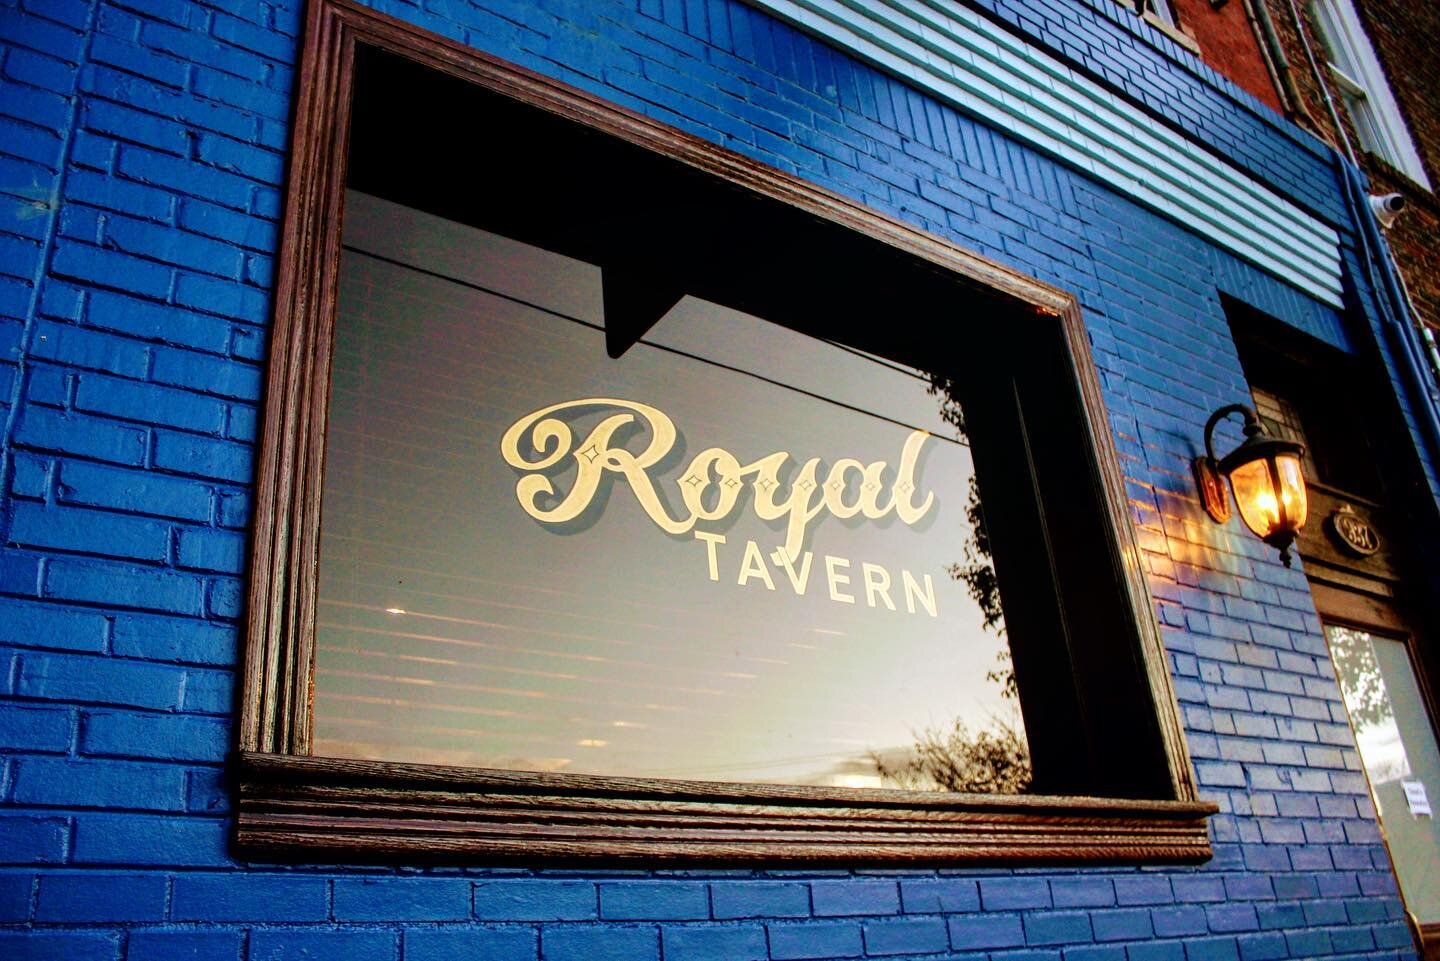 The wait is almost over!
Come on out this Monday, 11/25 4pm for our first official day back. 
We are so excited to reopen our doors and invite you all back into the Royal.

MON 11/25 4PM-2AM
TUES 11/26 4PM-2AM
WED 11/27 4PM-2AM
Closed on Thanksgiving